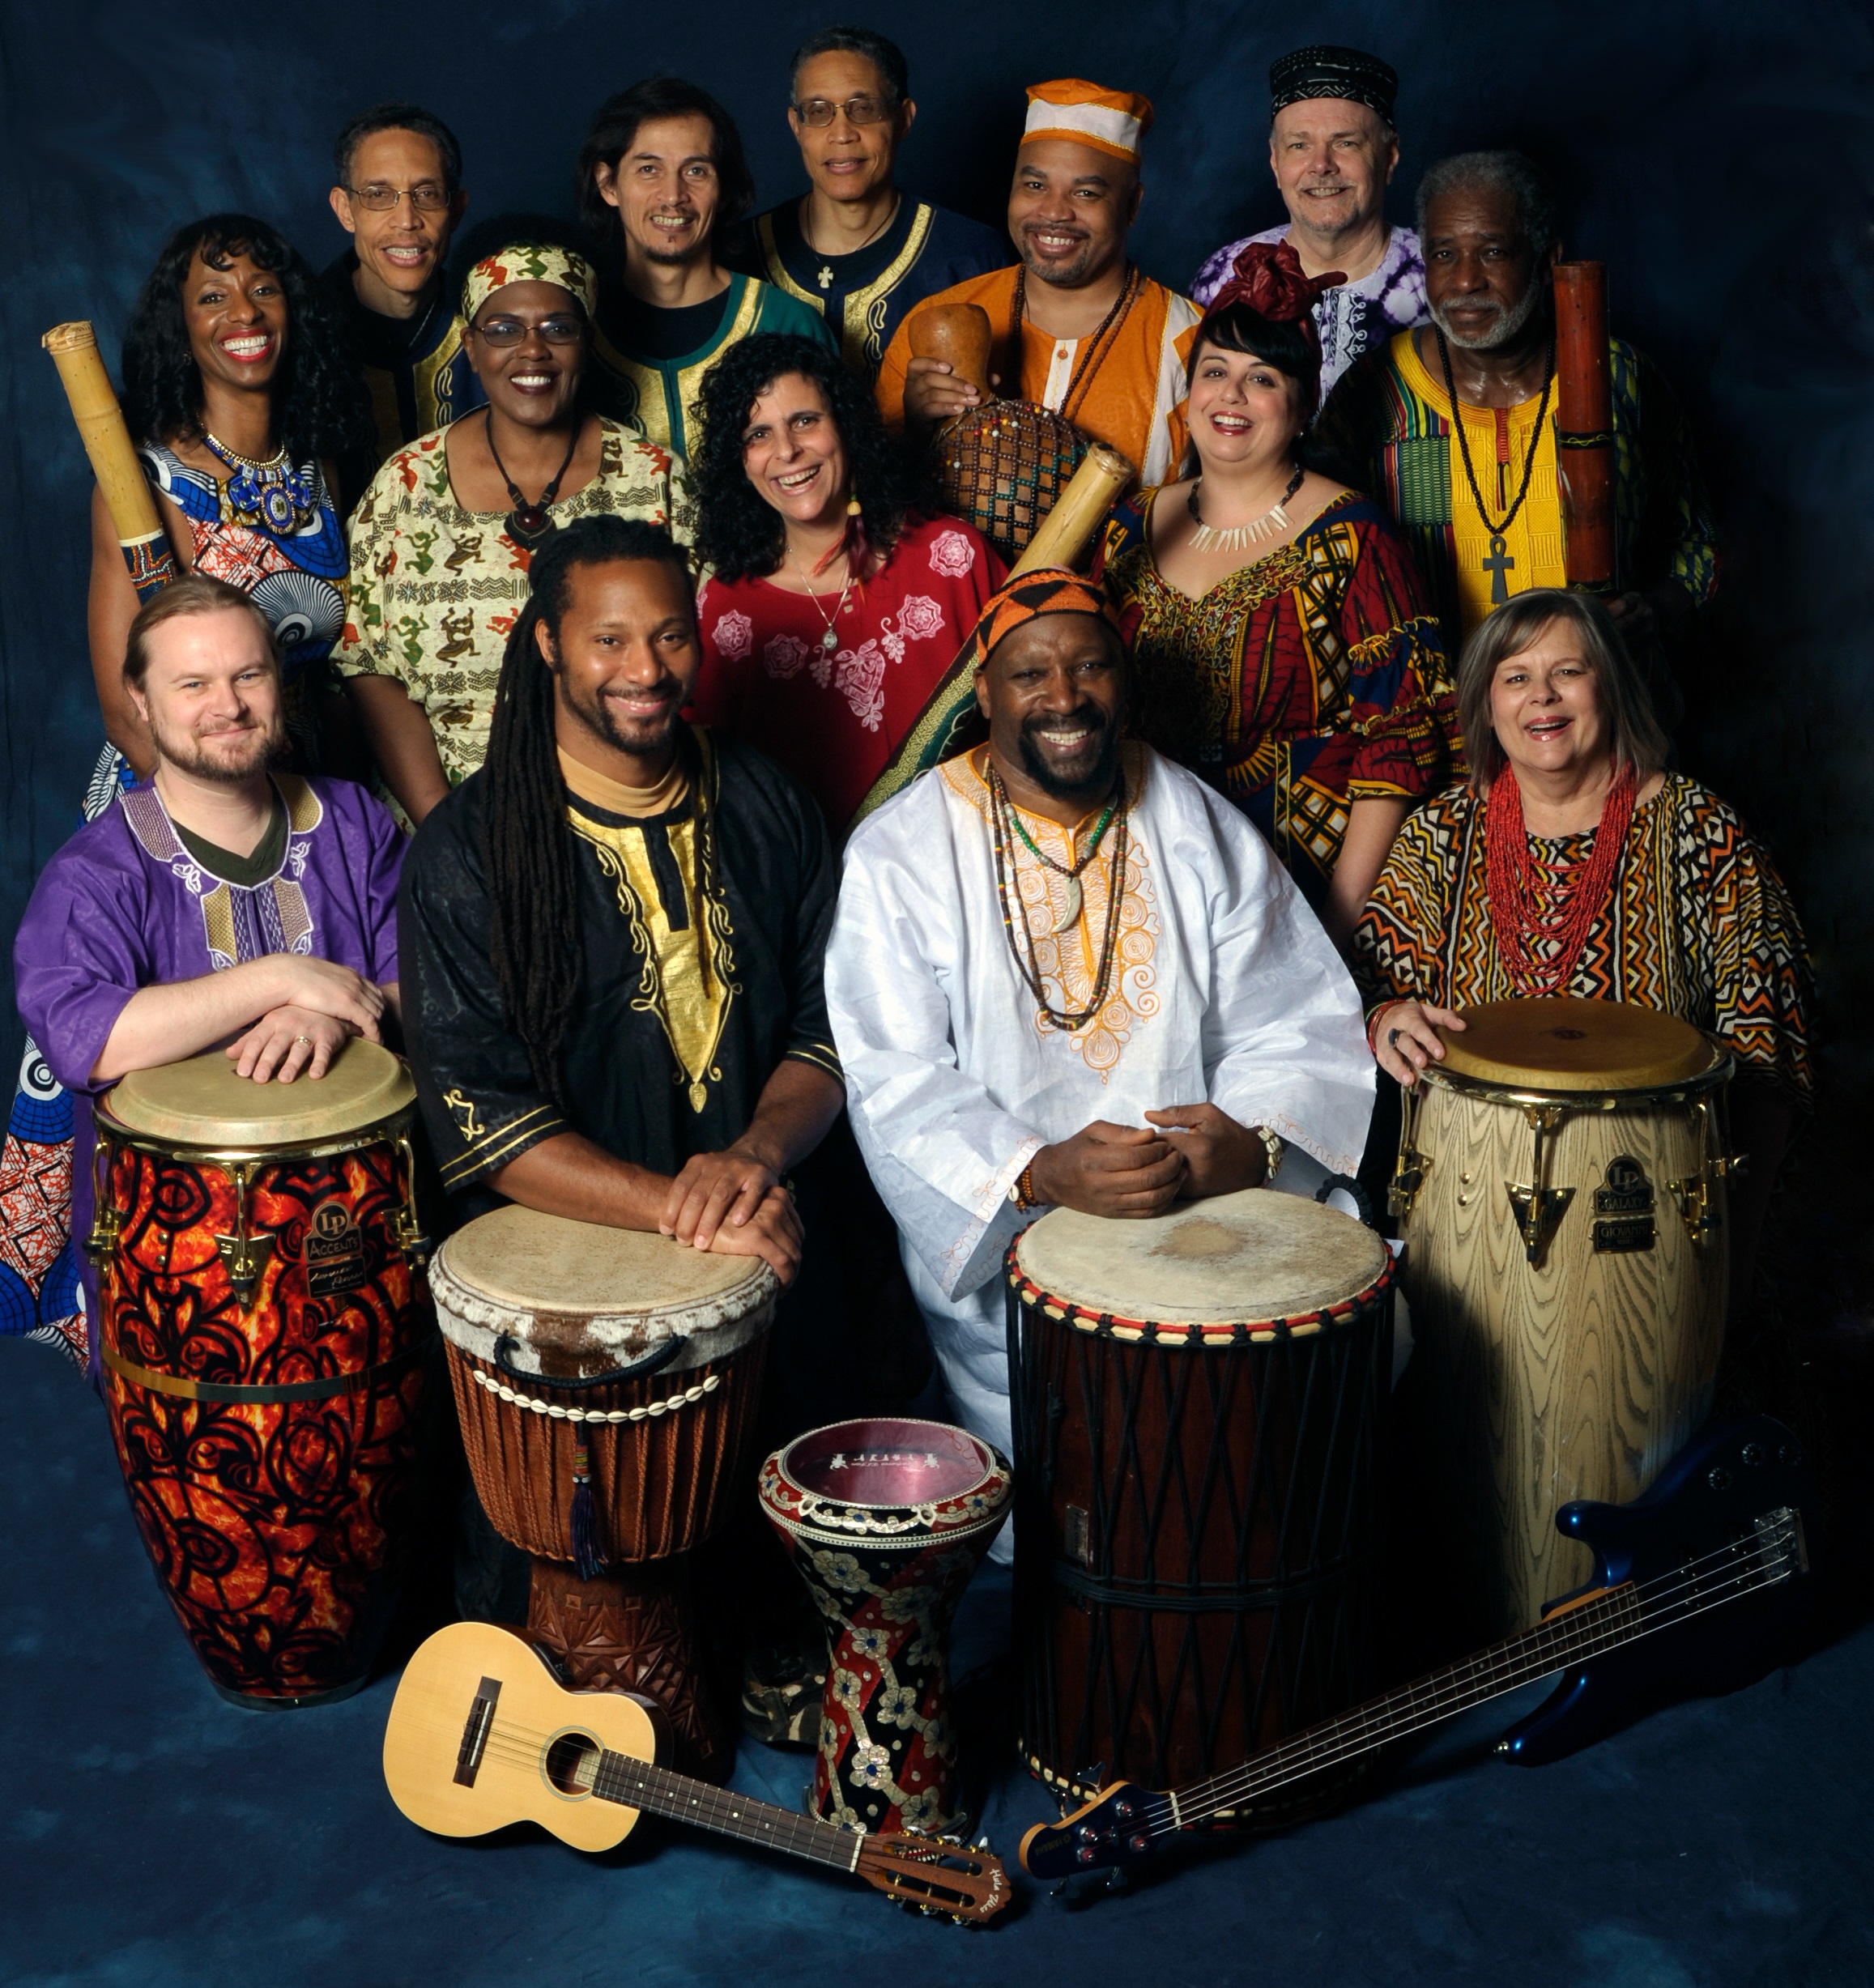 A photo of the members of the Joy of Djembe Drumming Ensemble, with their instruments.